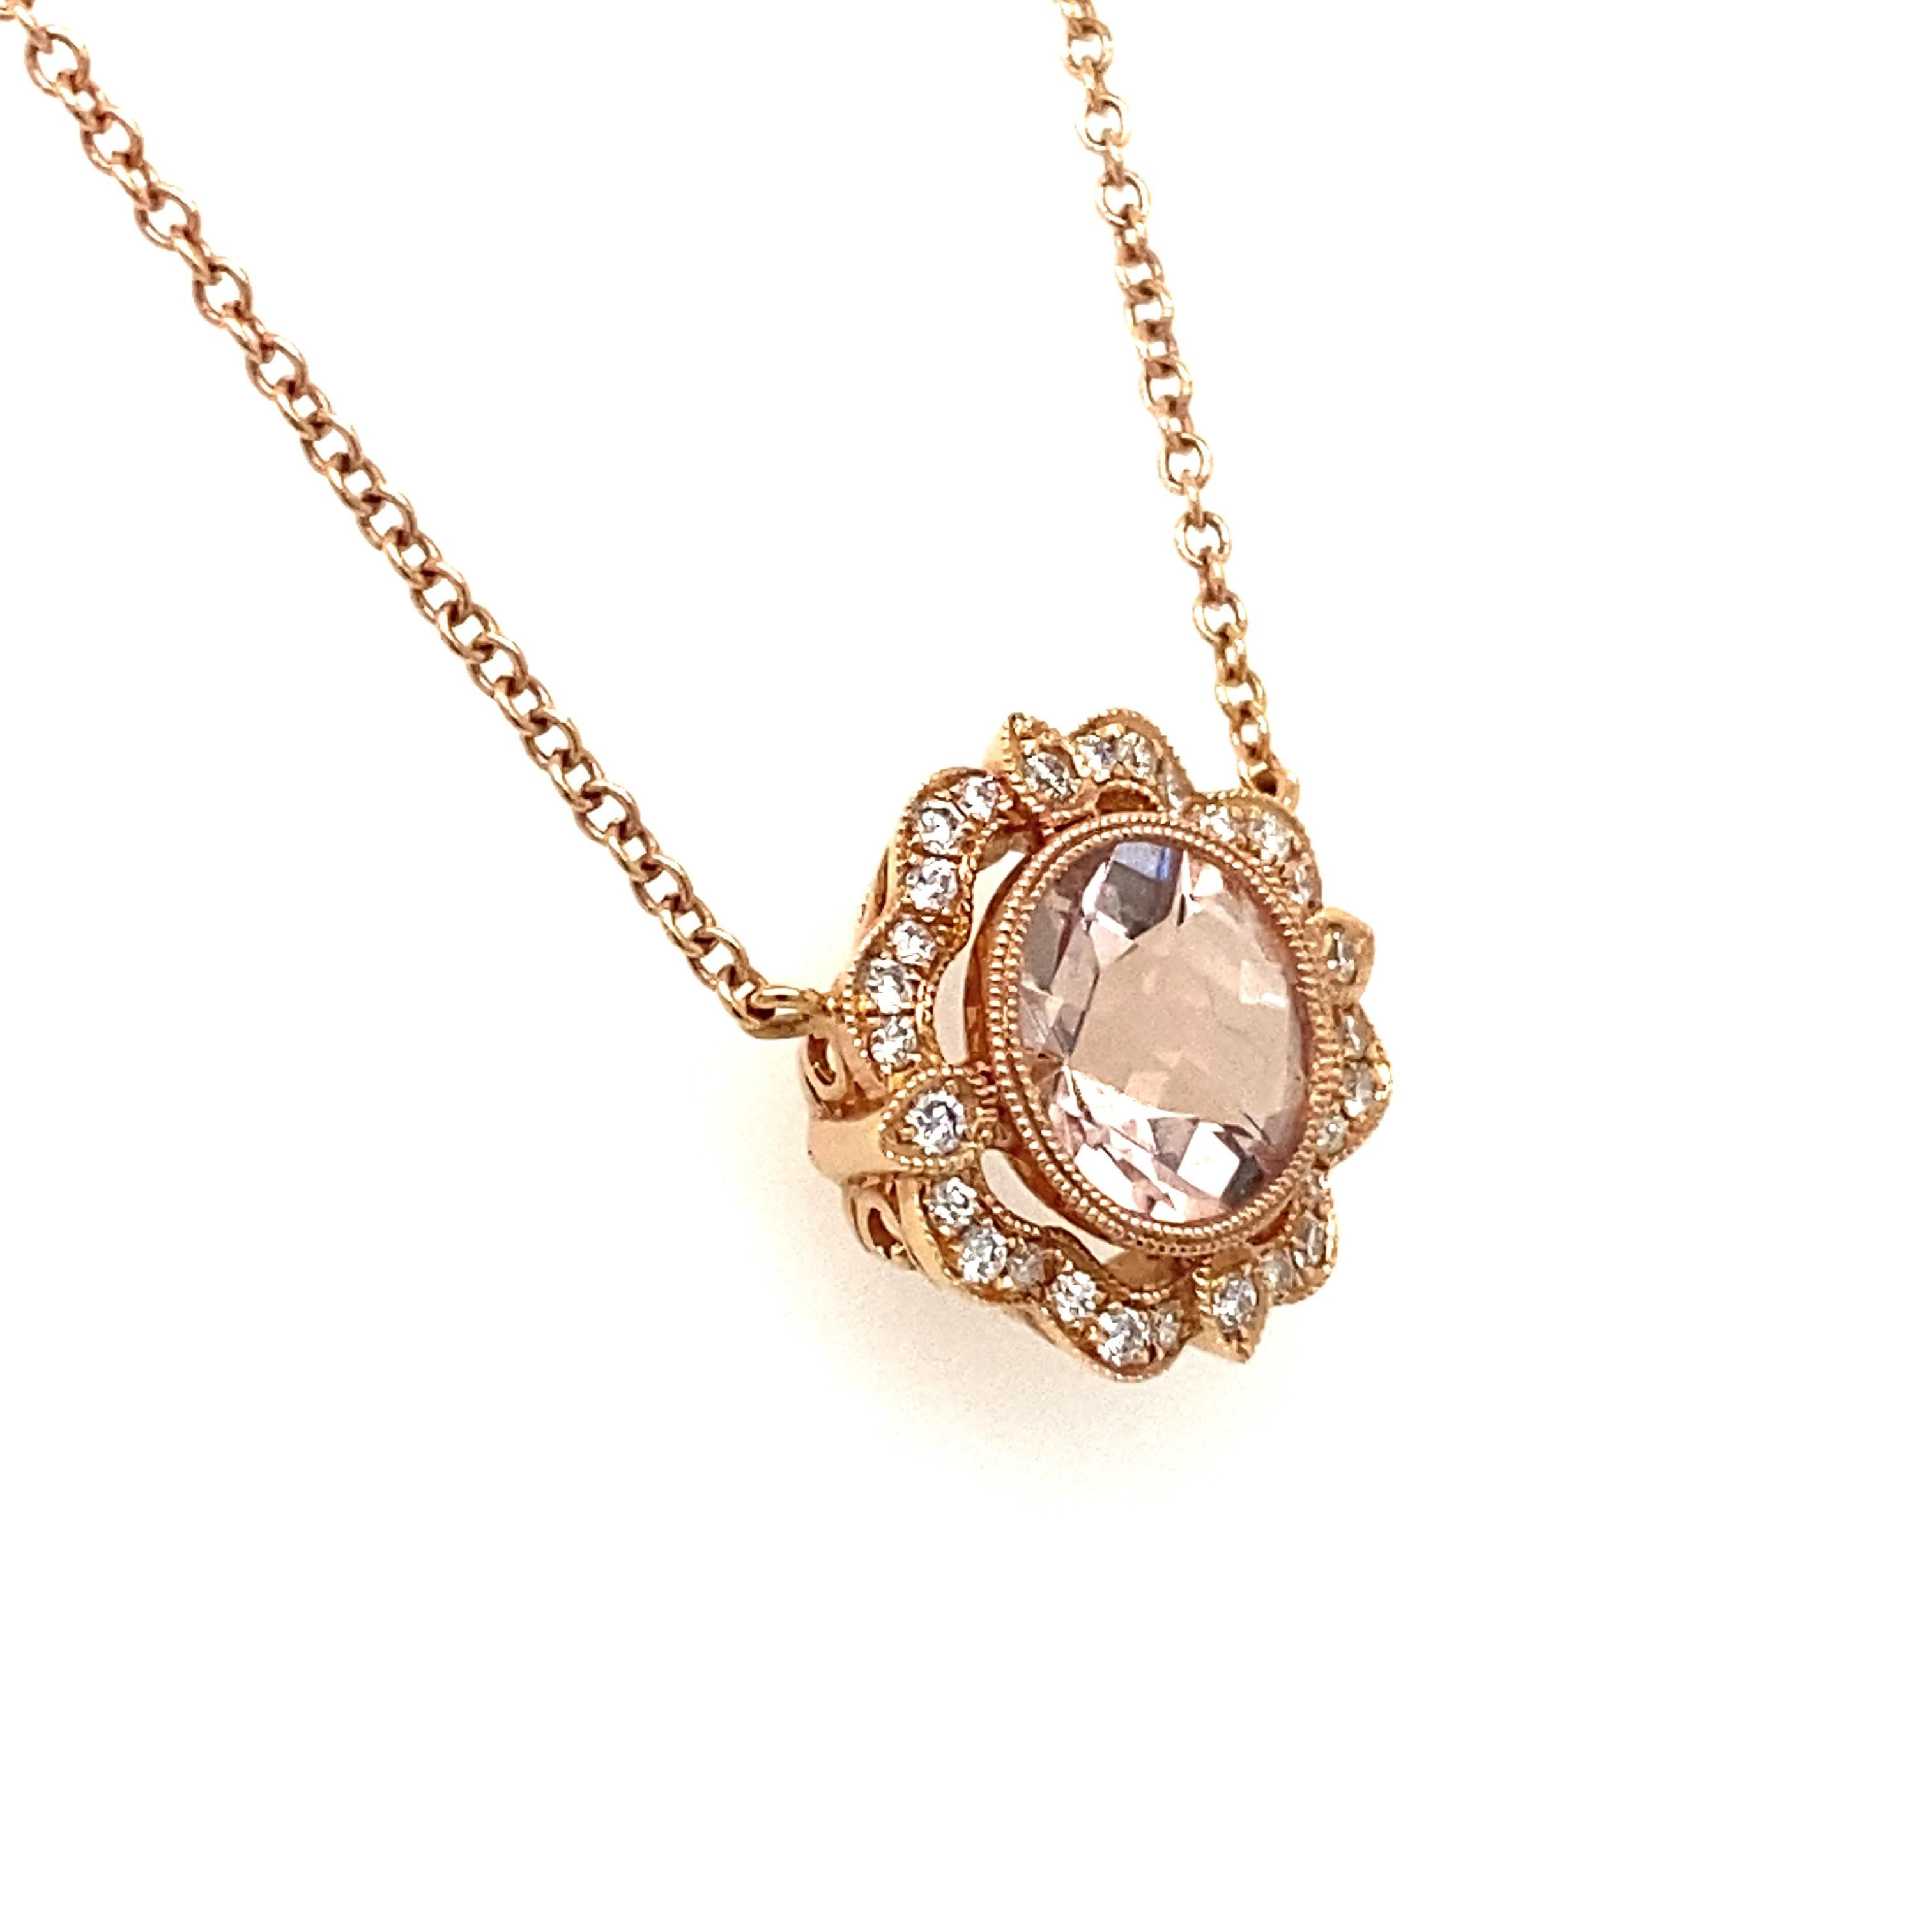 18 karat rose gold Morganite pendant necklace with diamond accents. 28 diamonds 0.18 carat total weight. 18 inch long chain.